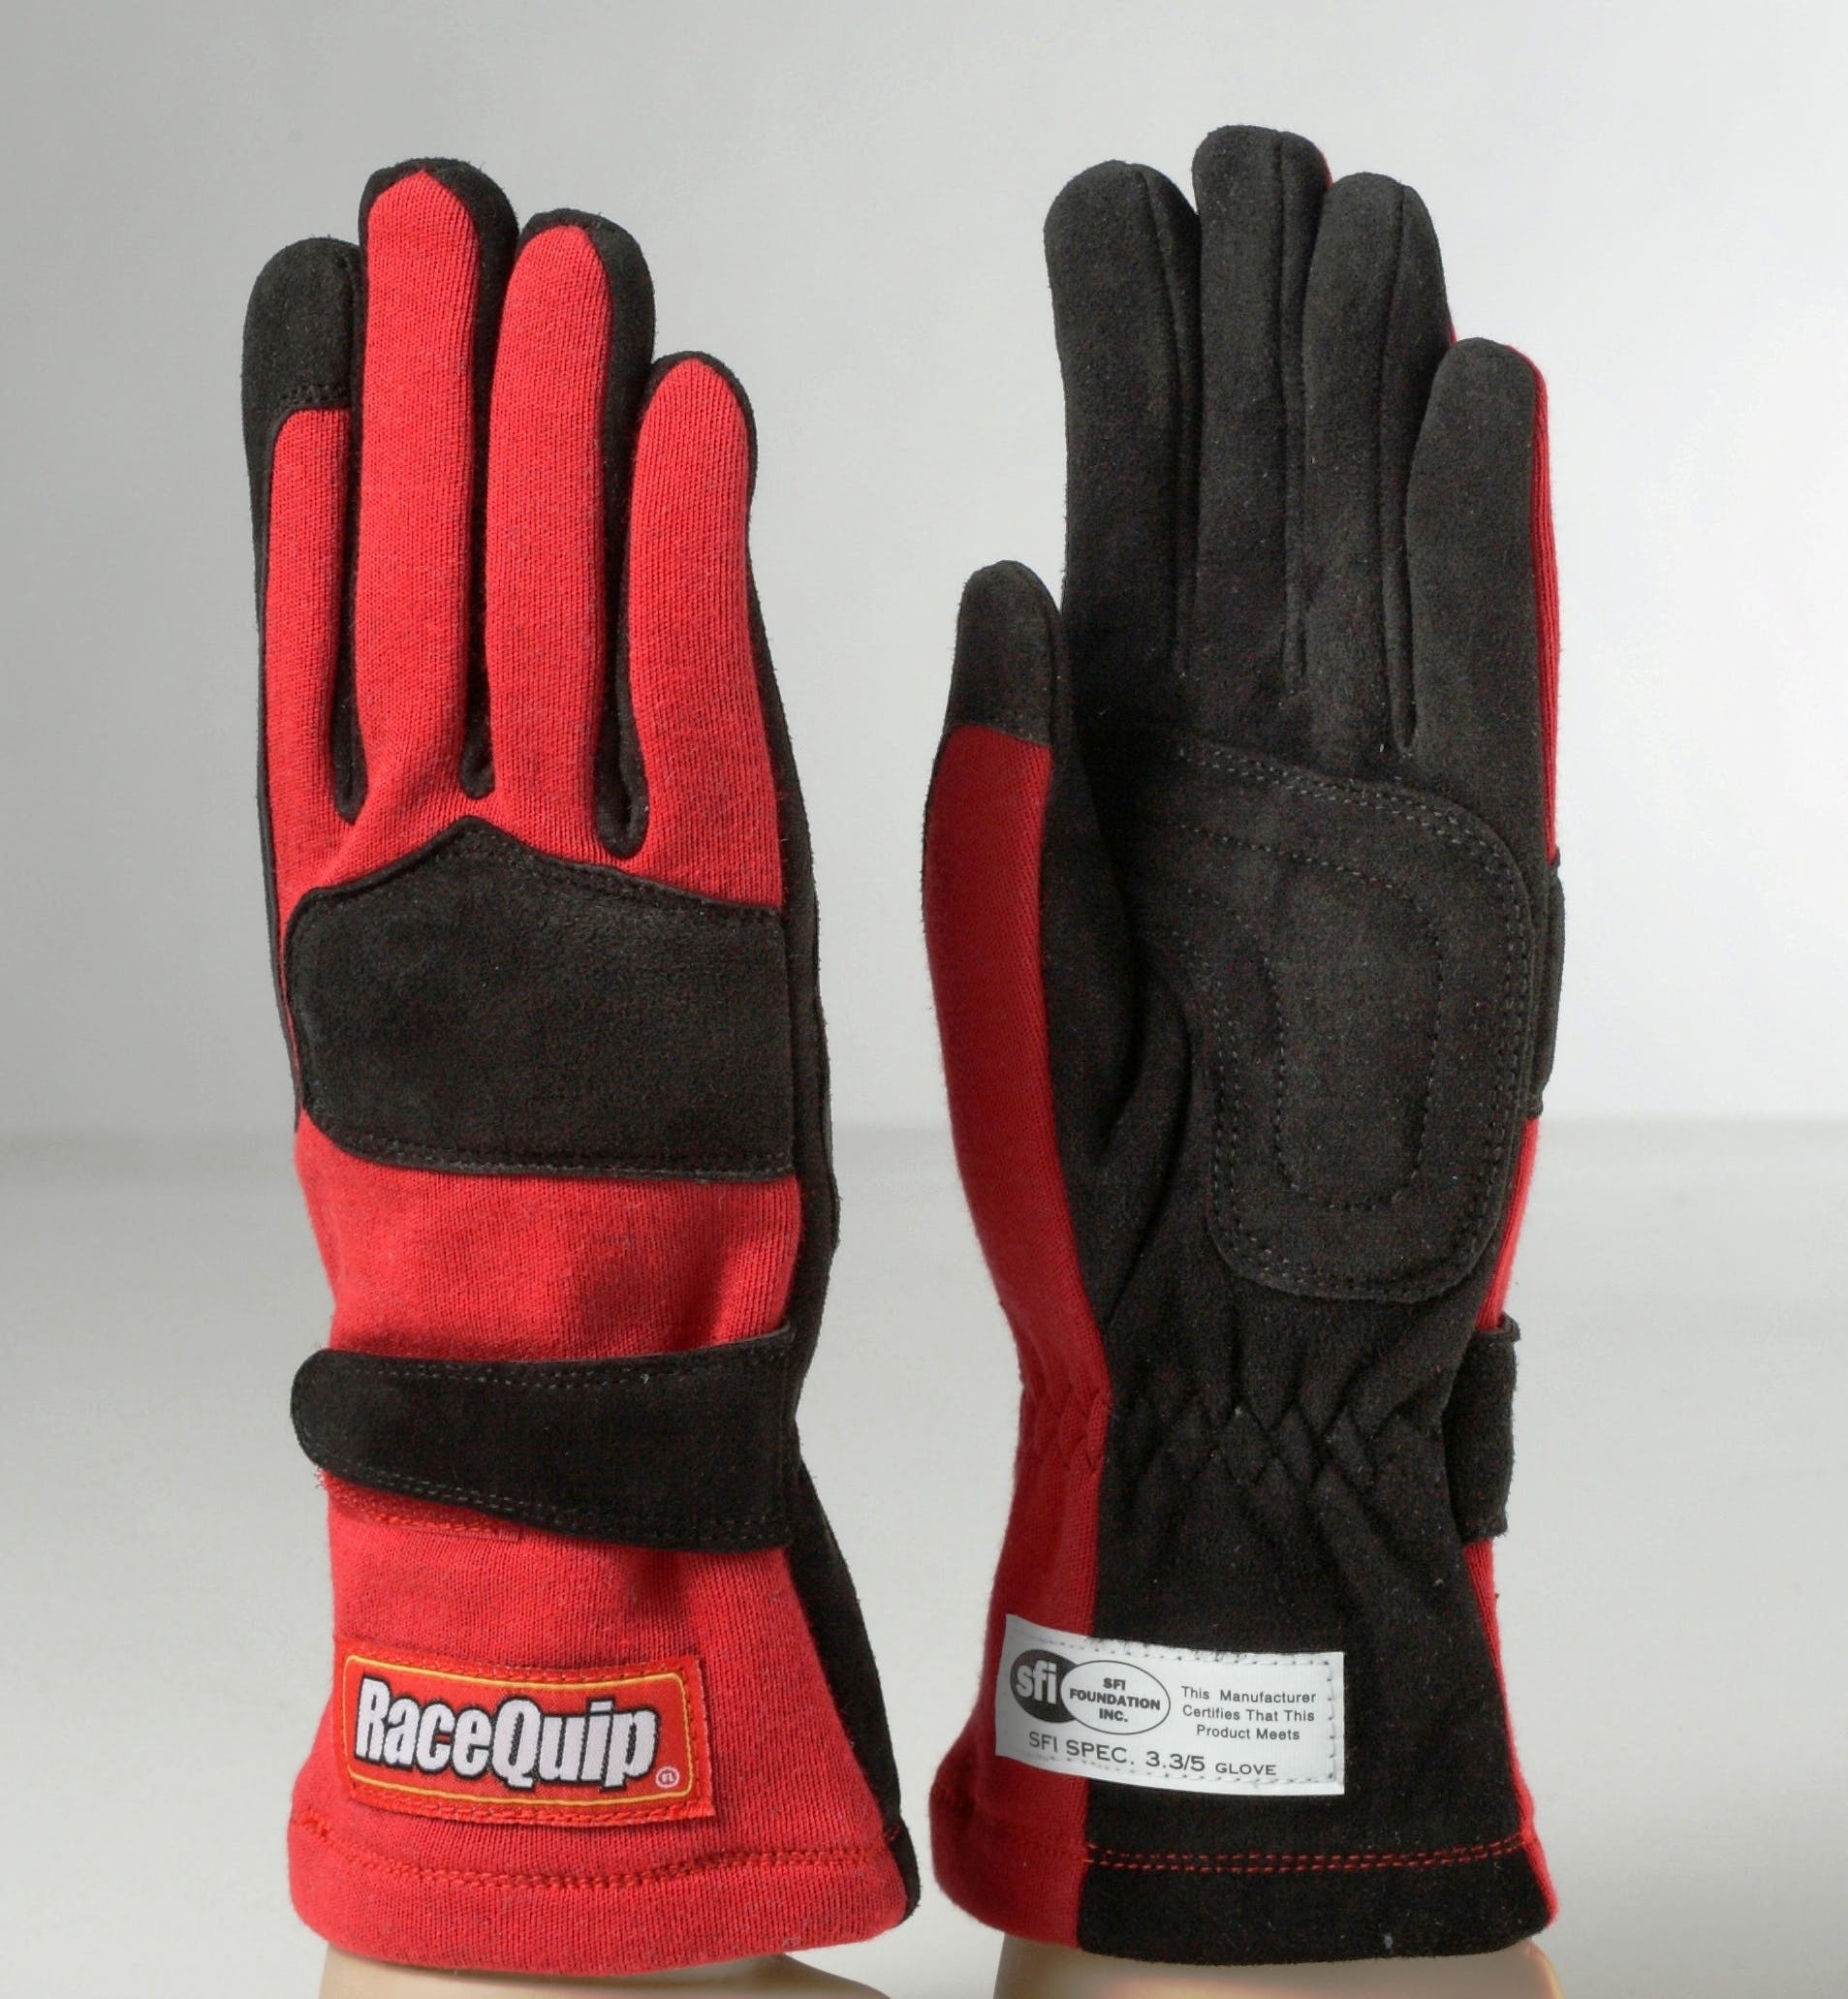 RaceQuip 355012 SFI-5 Double-Layer Racing Gloves (Red, Small)